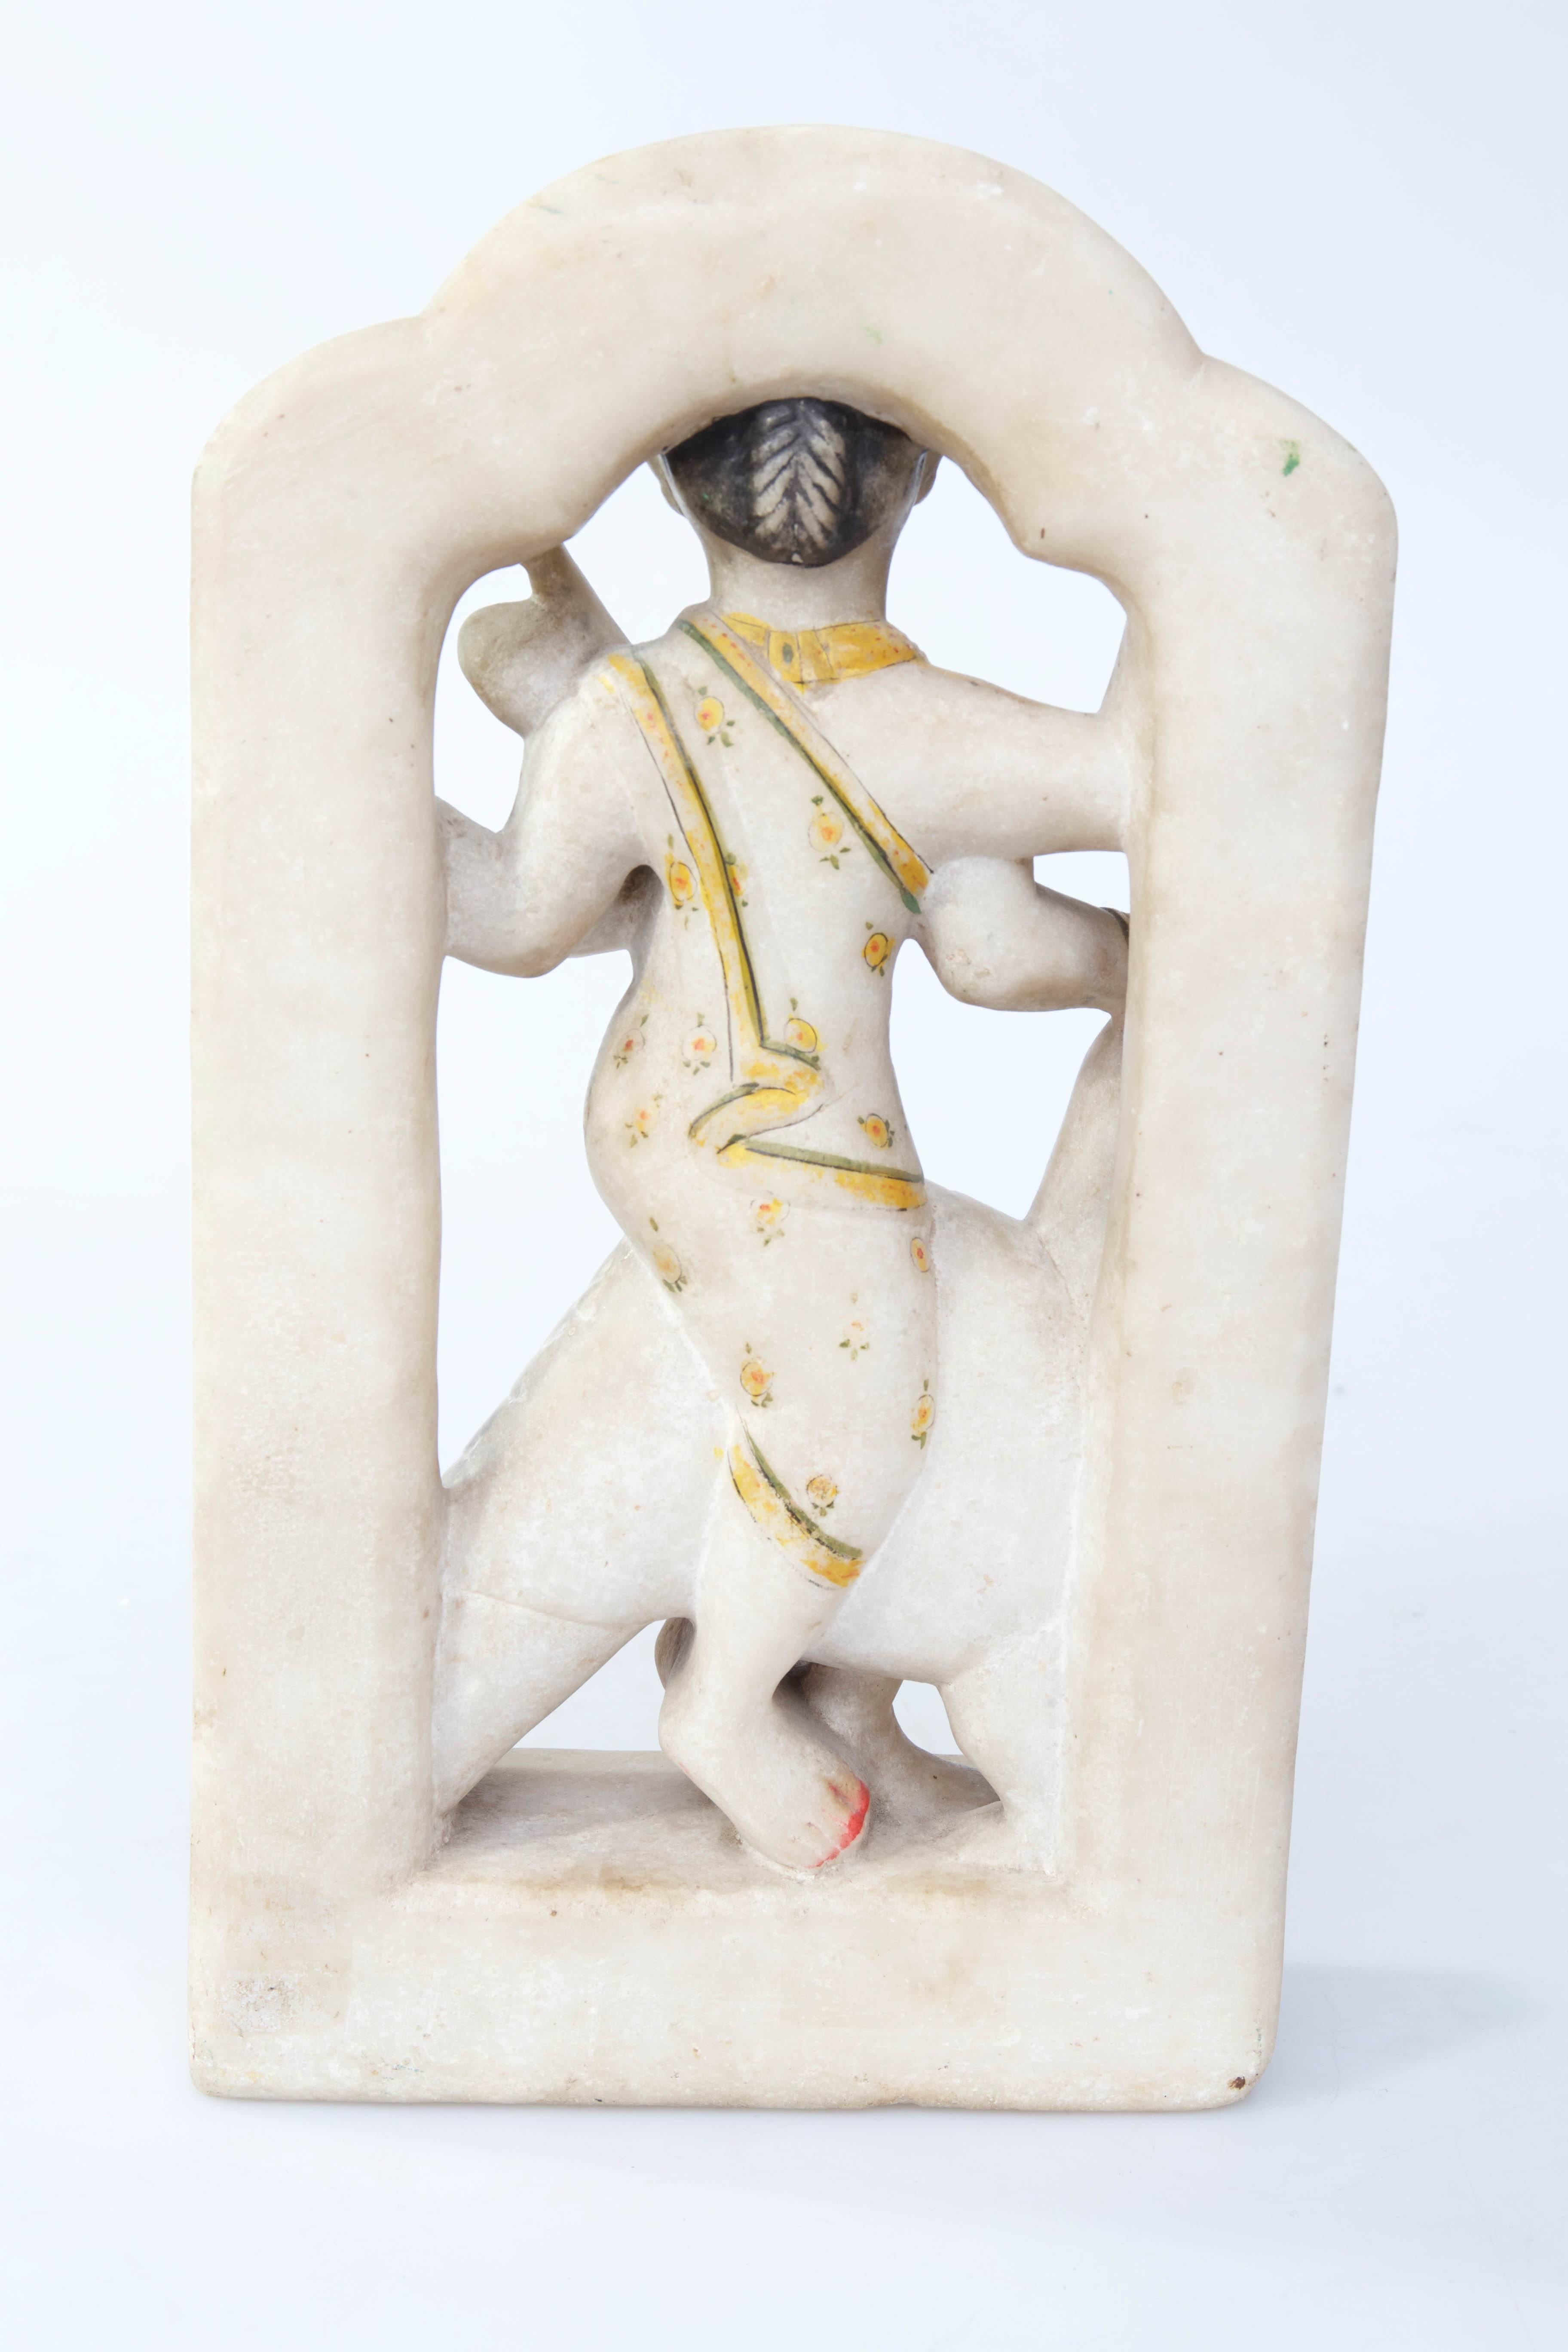 Indian parcel-gilt alabaster sculpture of Indian deity with bird, circa 1800 or earlier.